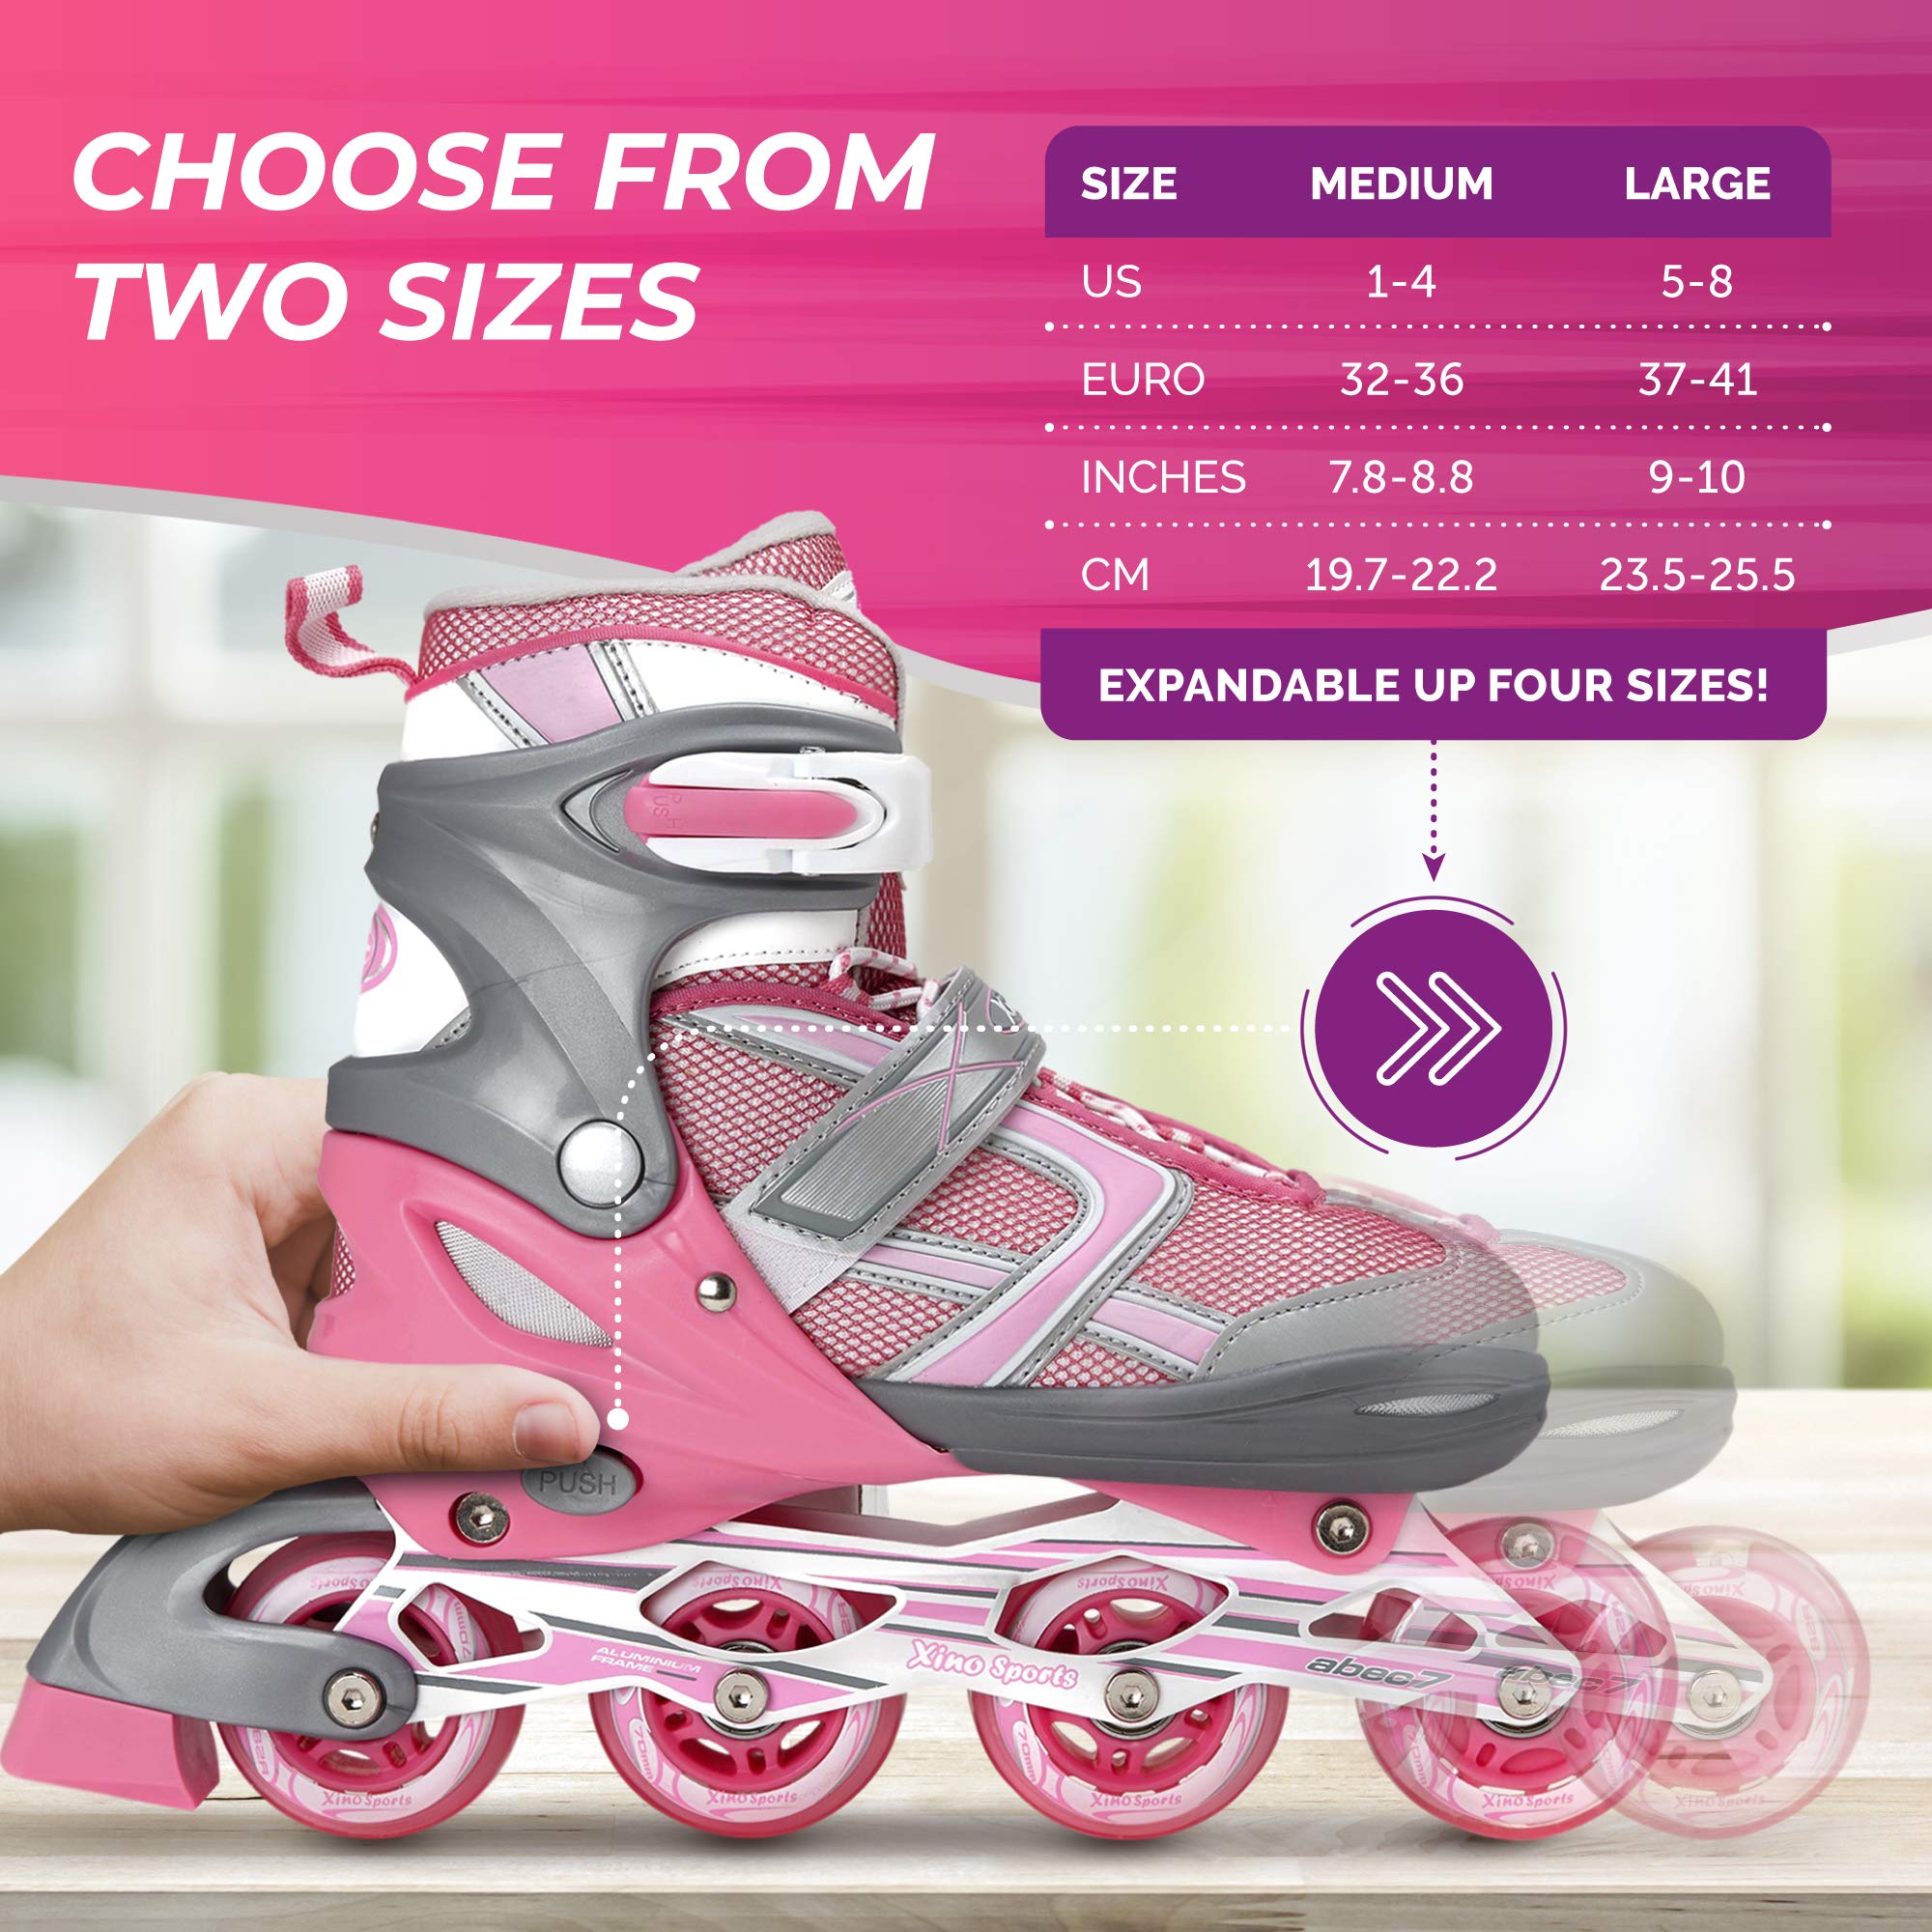 Roller Blades for Boys and Girls With Illuminating Wheels | Xino Sports - Xino Sports